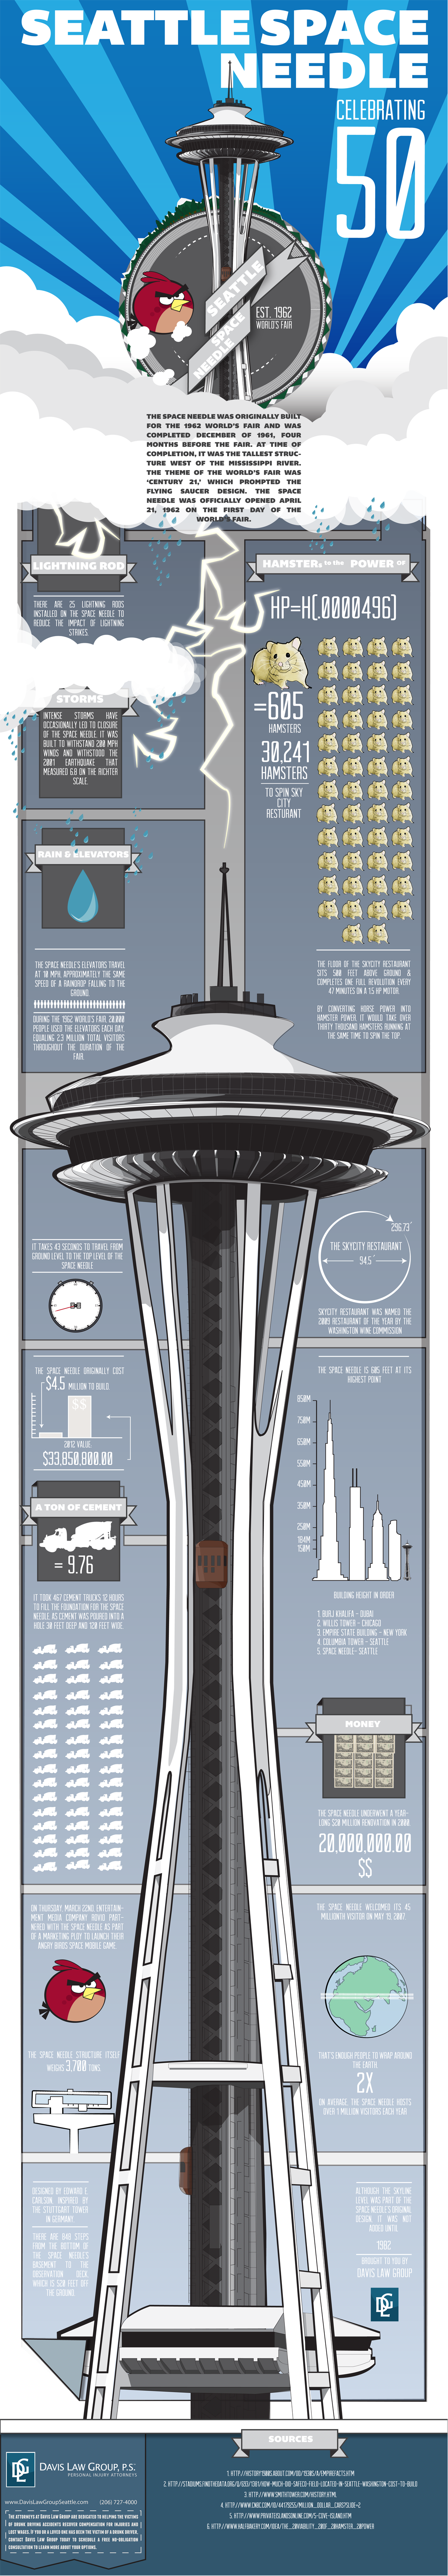 How much did it cost to build the space needle Seattle Space Needle Infographic Celebrates 50 Years In History